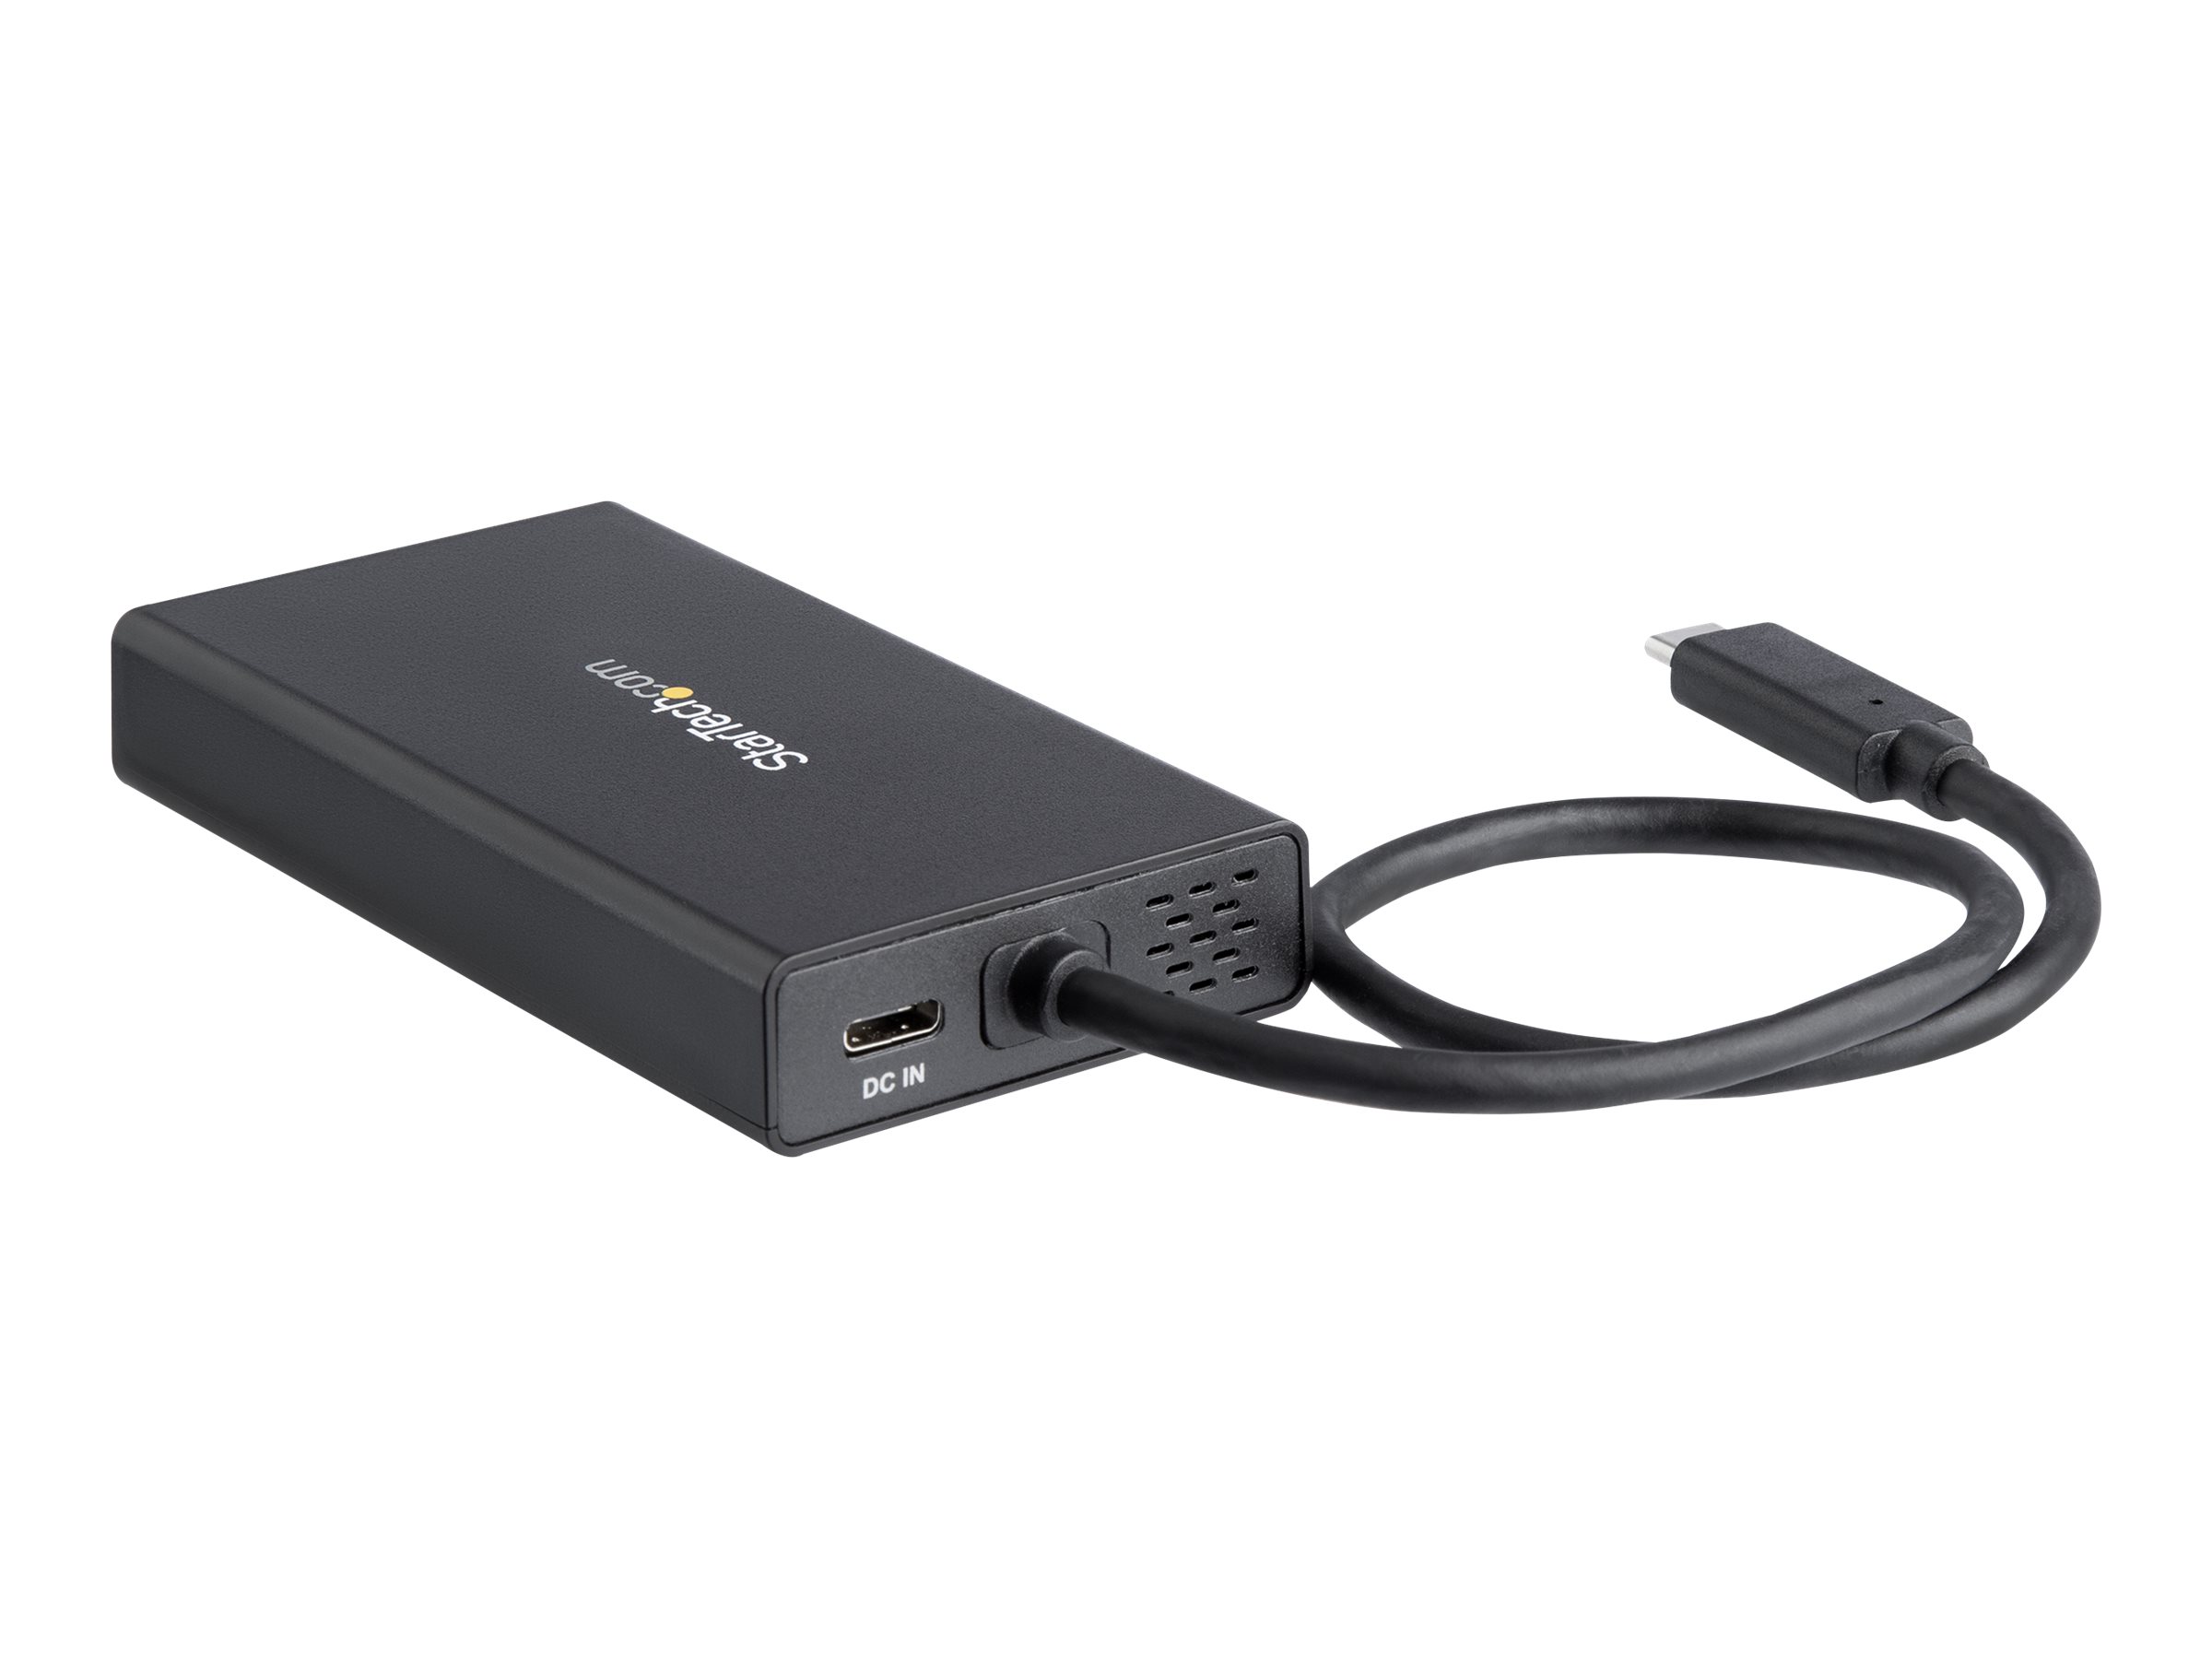 StarTech.com USB-C Multiport Adapter - mit Power Delivery (USB PD)